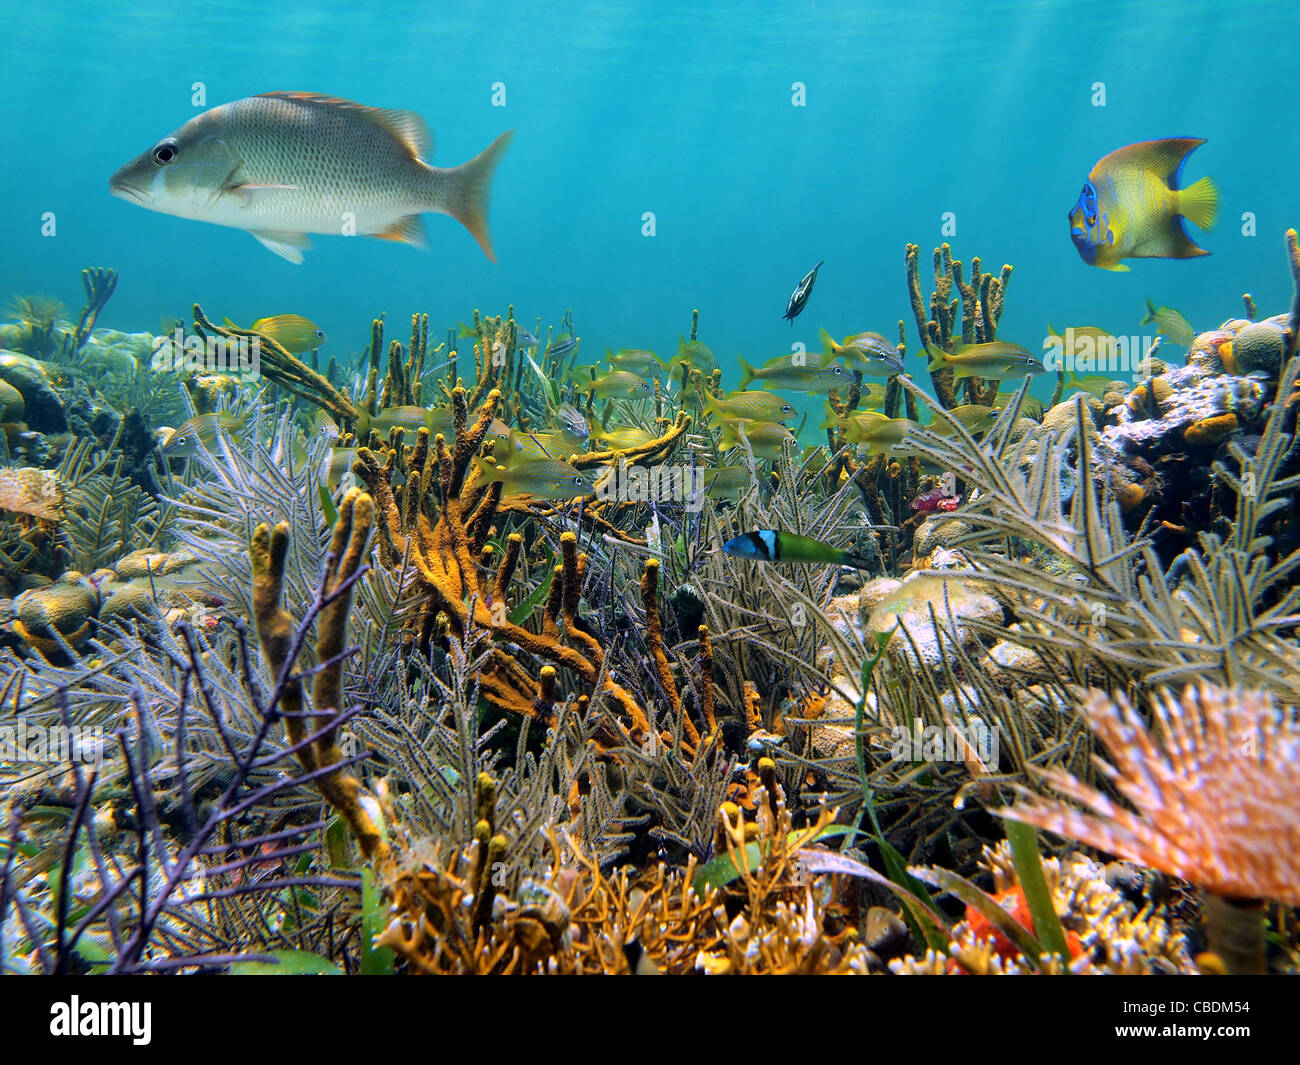 Thriving seabed with a coral reef and tropical fish Caribbean sea, Panama, Central America Stock Photo